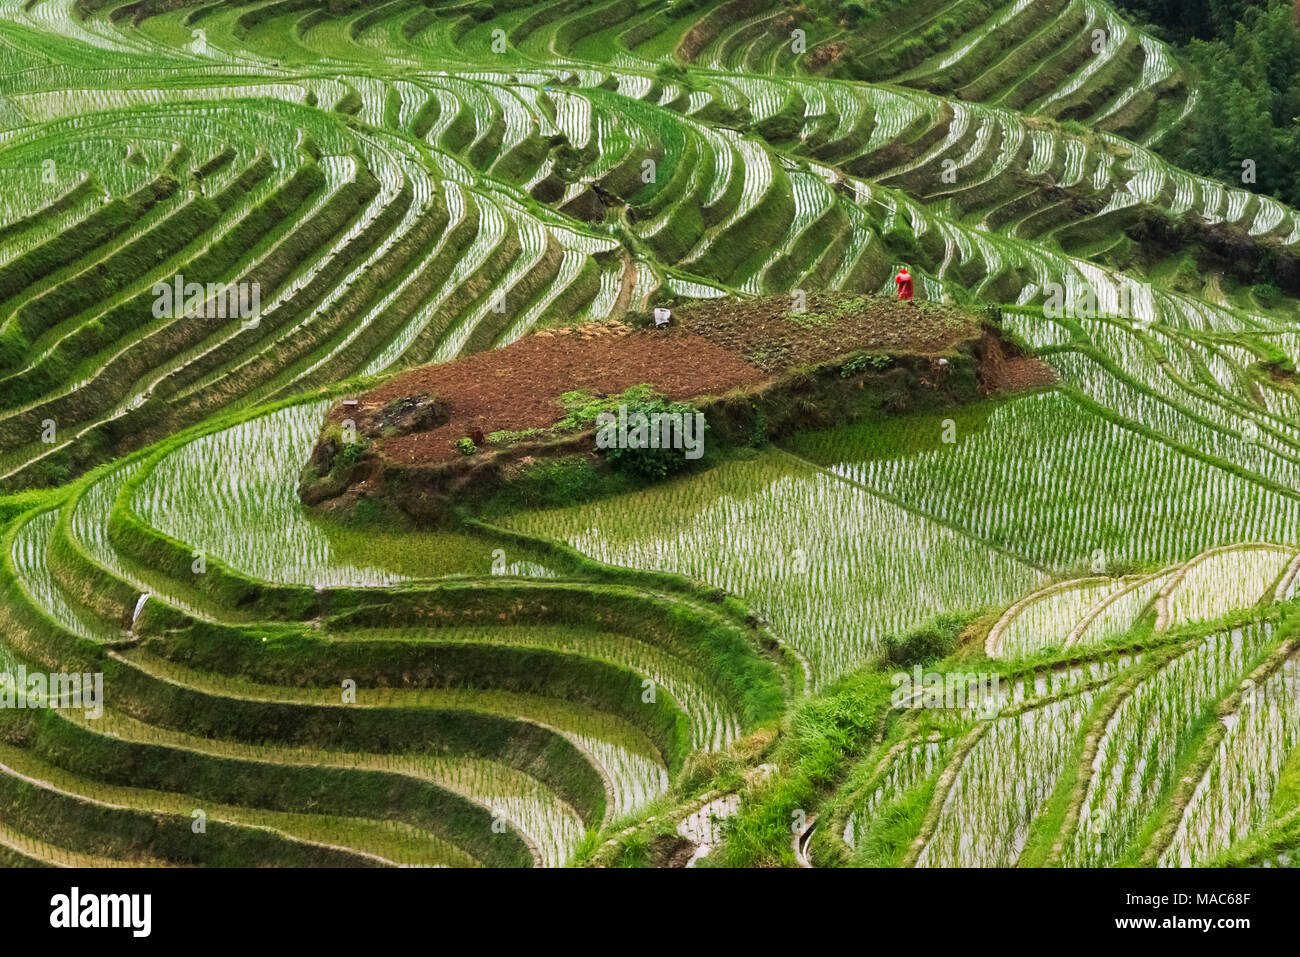 Terraces with newly planted rice seedlings in the mountain, Longsheng, Guangxi Province, China Stock Photo